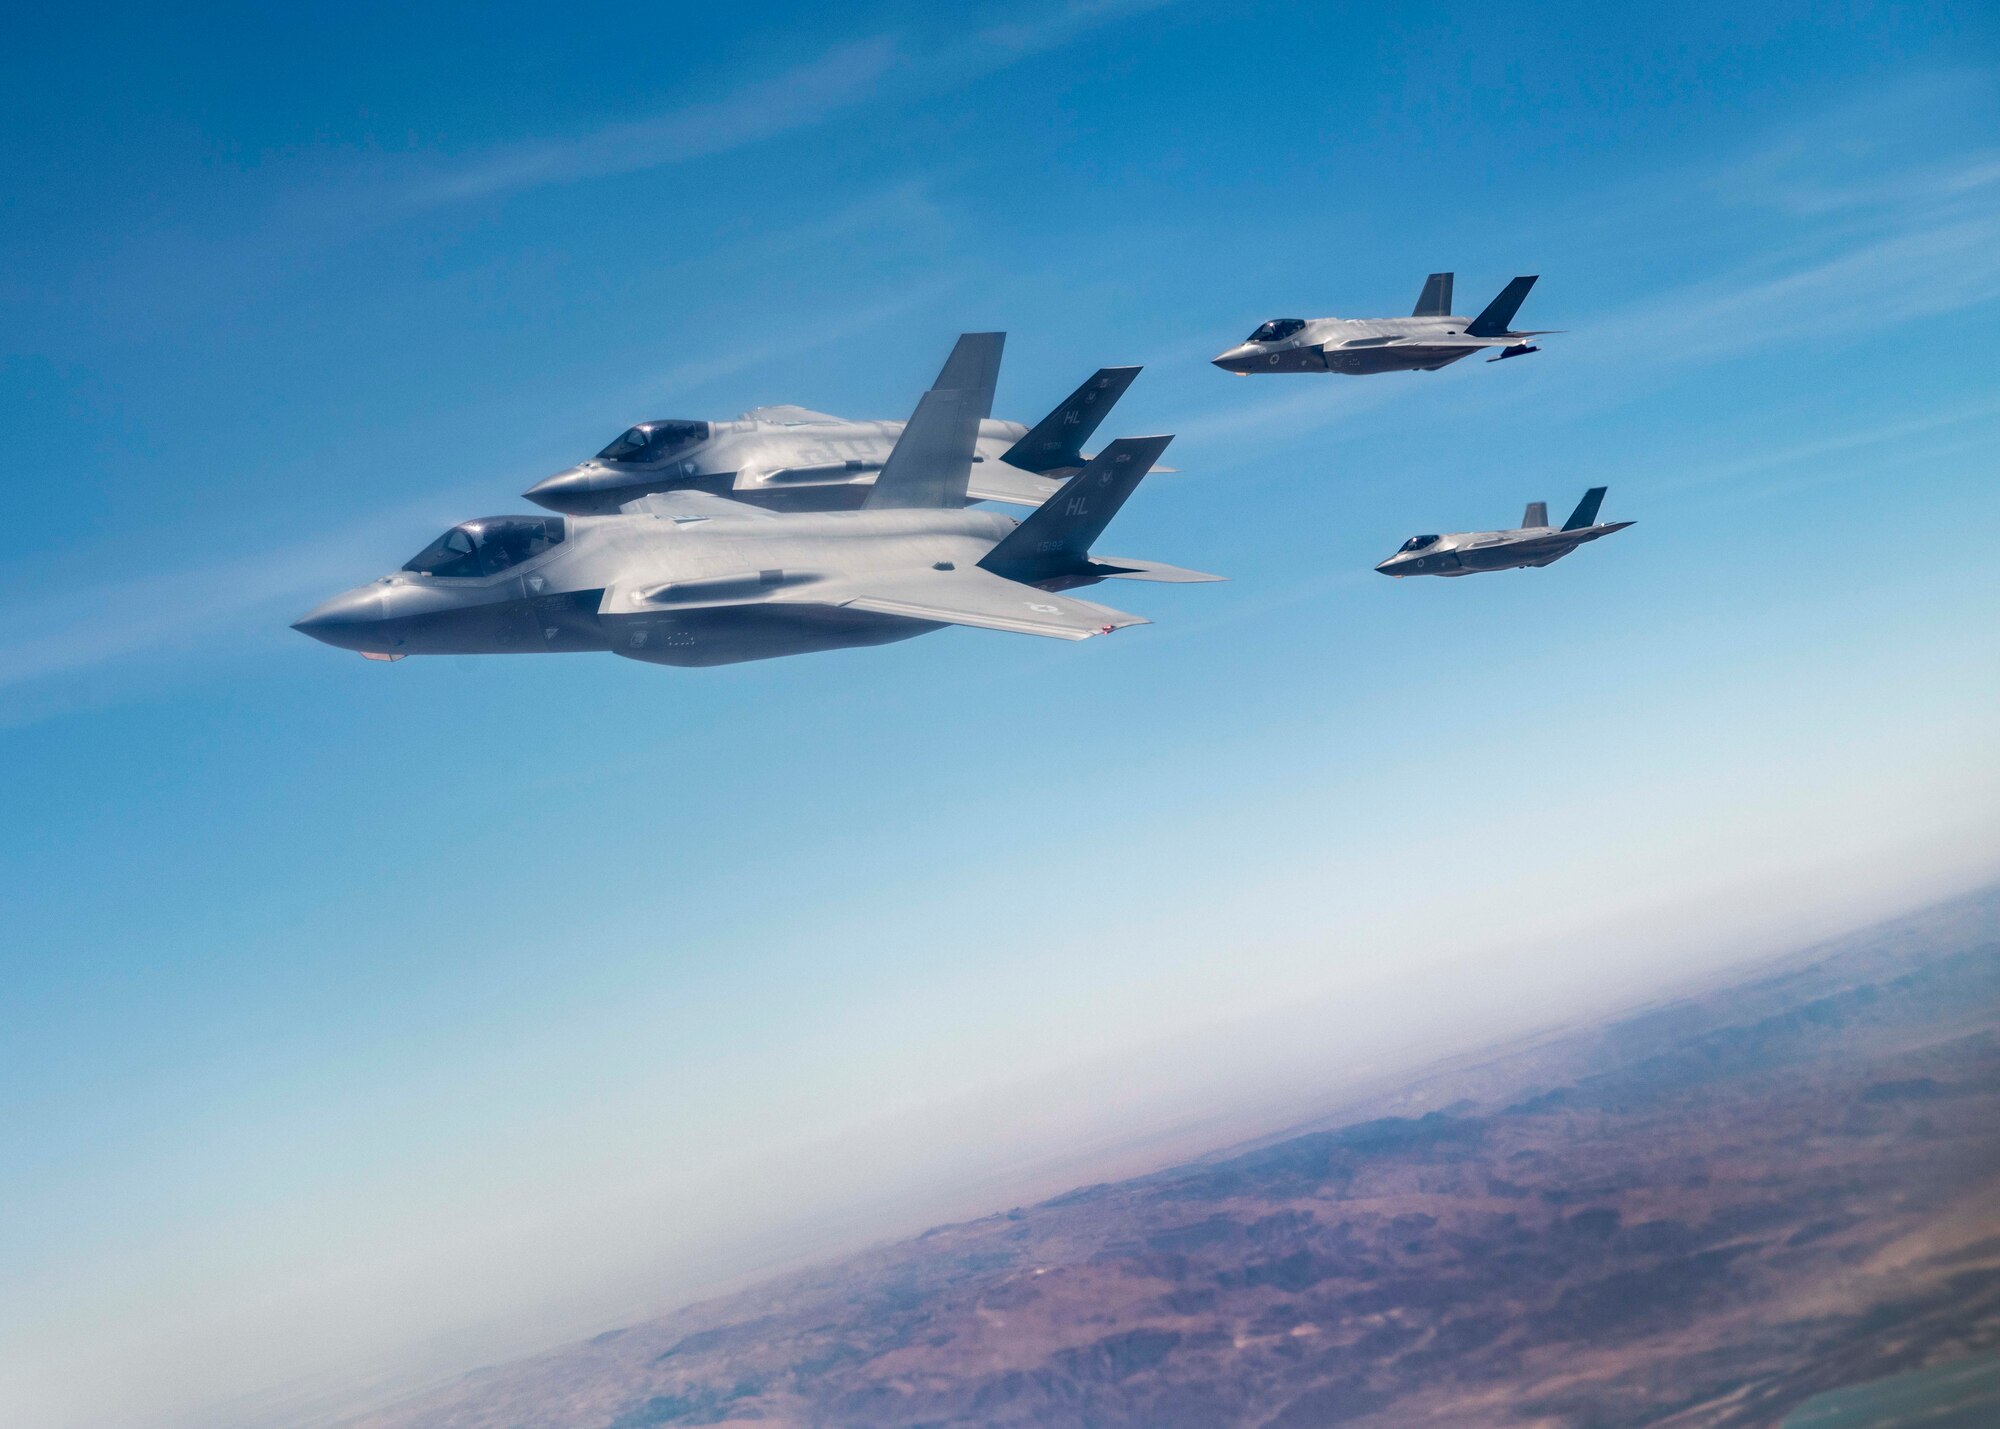 Israeli Air Force F-35I Lightning II “Adir” and U.S. Air Force 421st Fighter Squadron F-35A Lightning II  fly together after refueling from a 908th Expeditionary Refueling Squadron KC-10 Extender during exercise “Enduring Lightning II” over Israel Aug. 2, 2020. While forging a resolute partnership, the allies train to maintain a ready posture to deter against regional aggressors.  (U.S. Air Force photo by Master Sgt. Patrick OReilly)